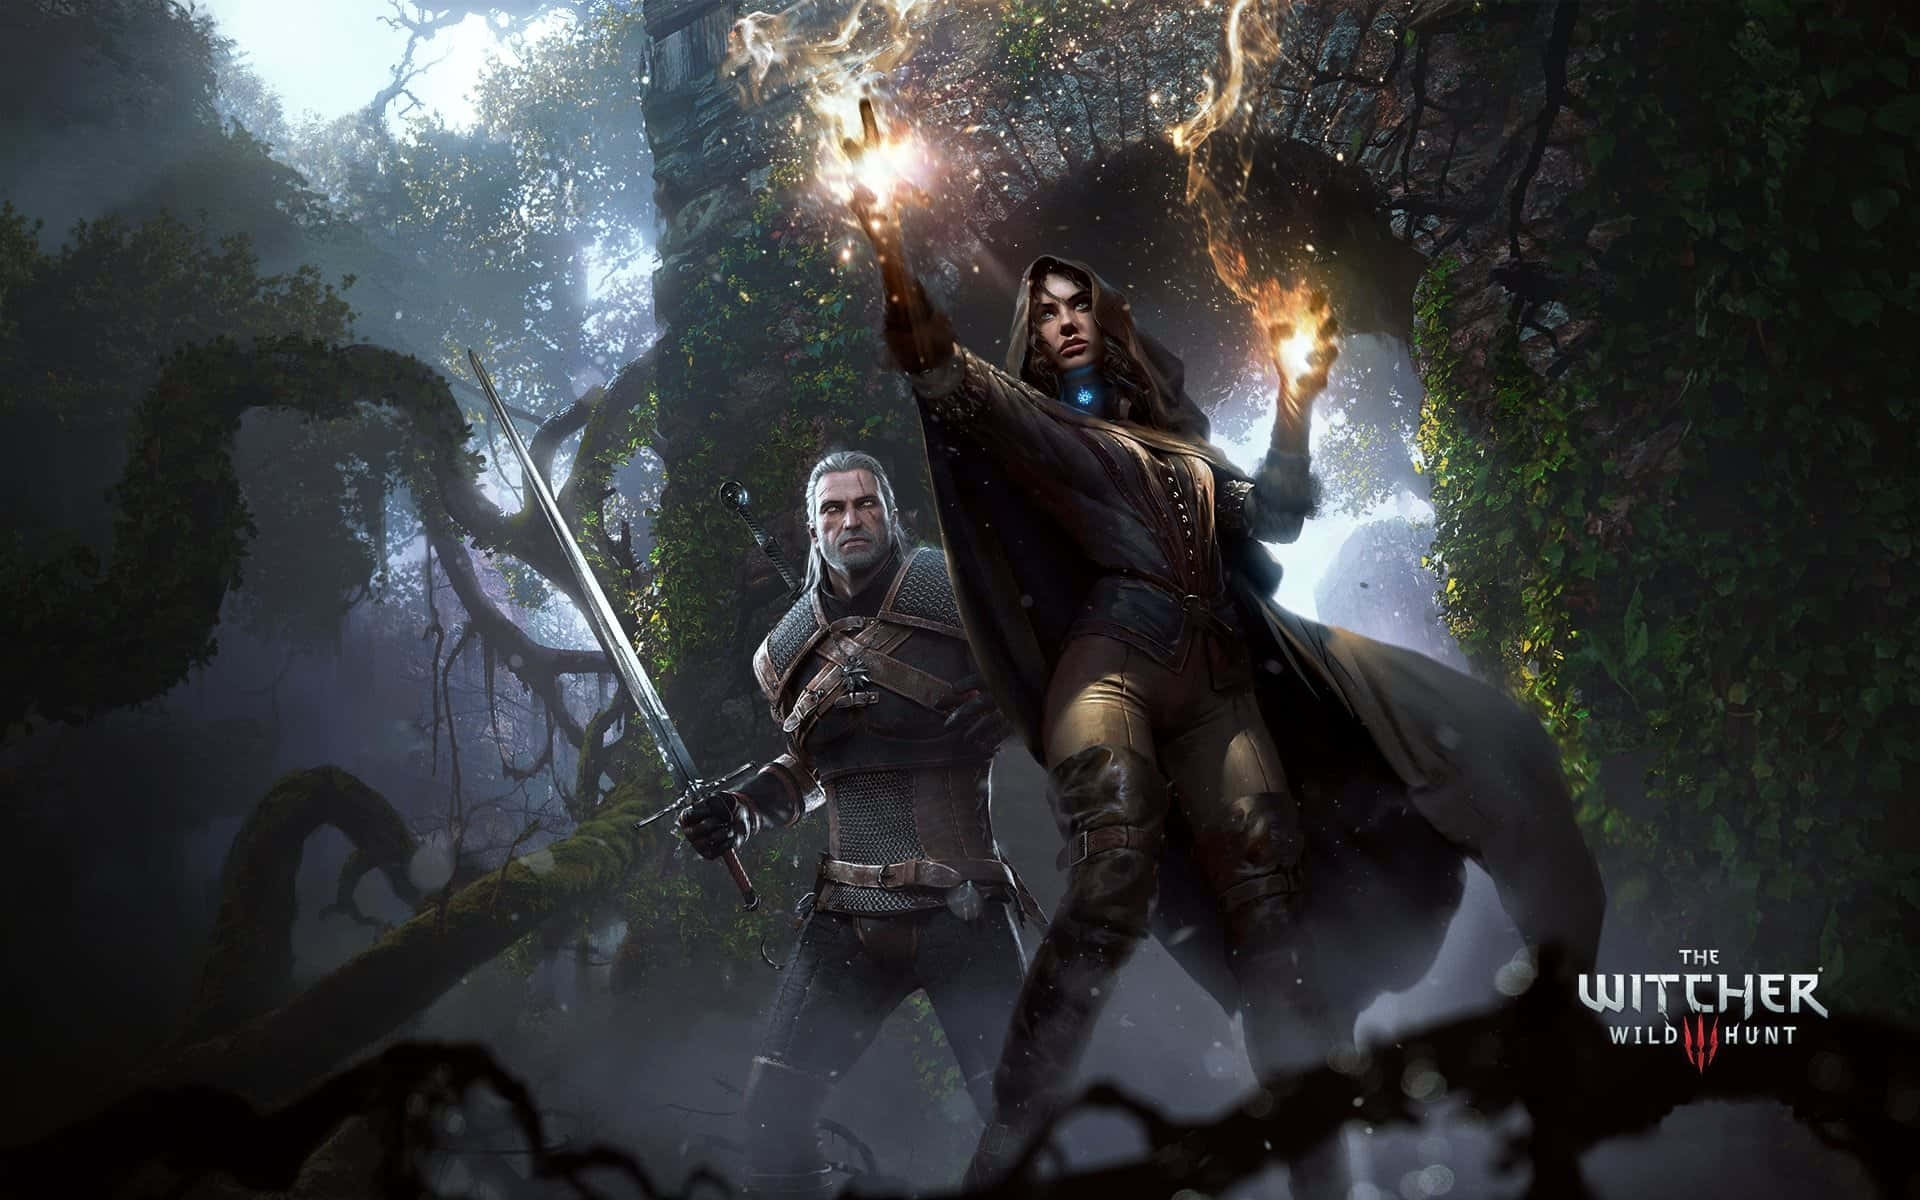 “Explore the world of The Witcher with Witcher 3 Desktop” Wallpaper